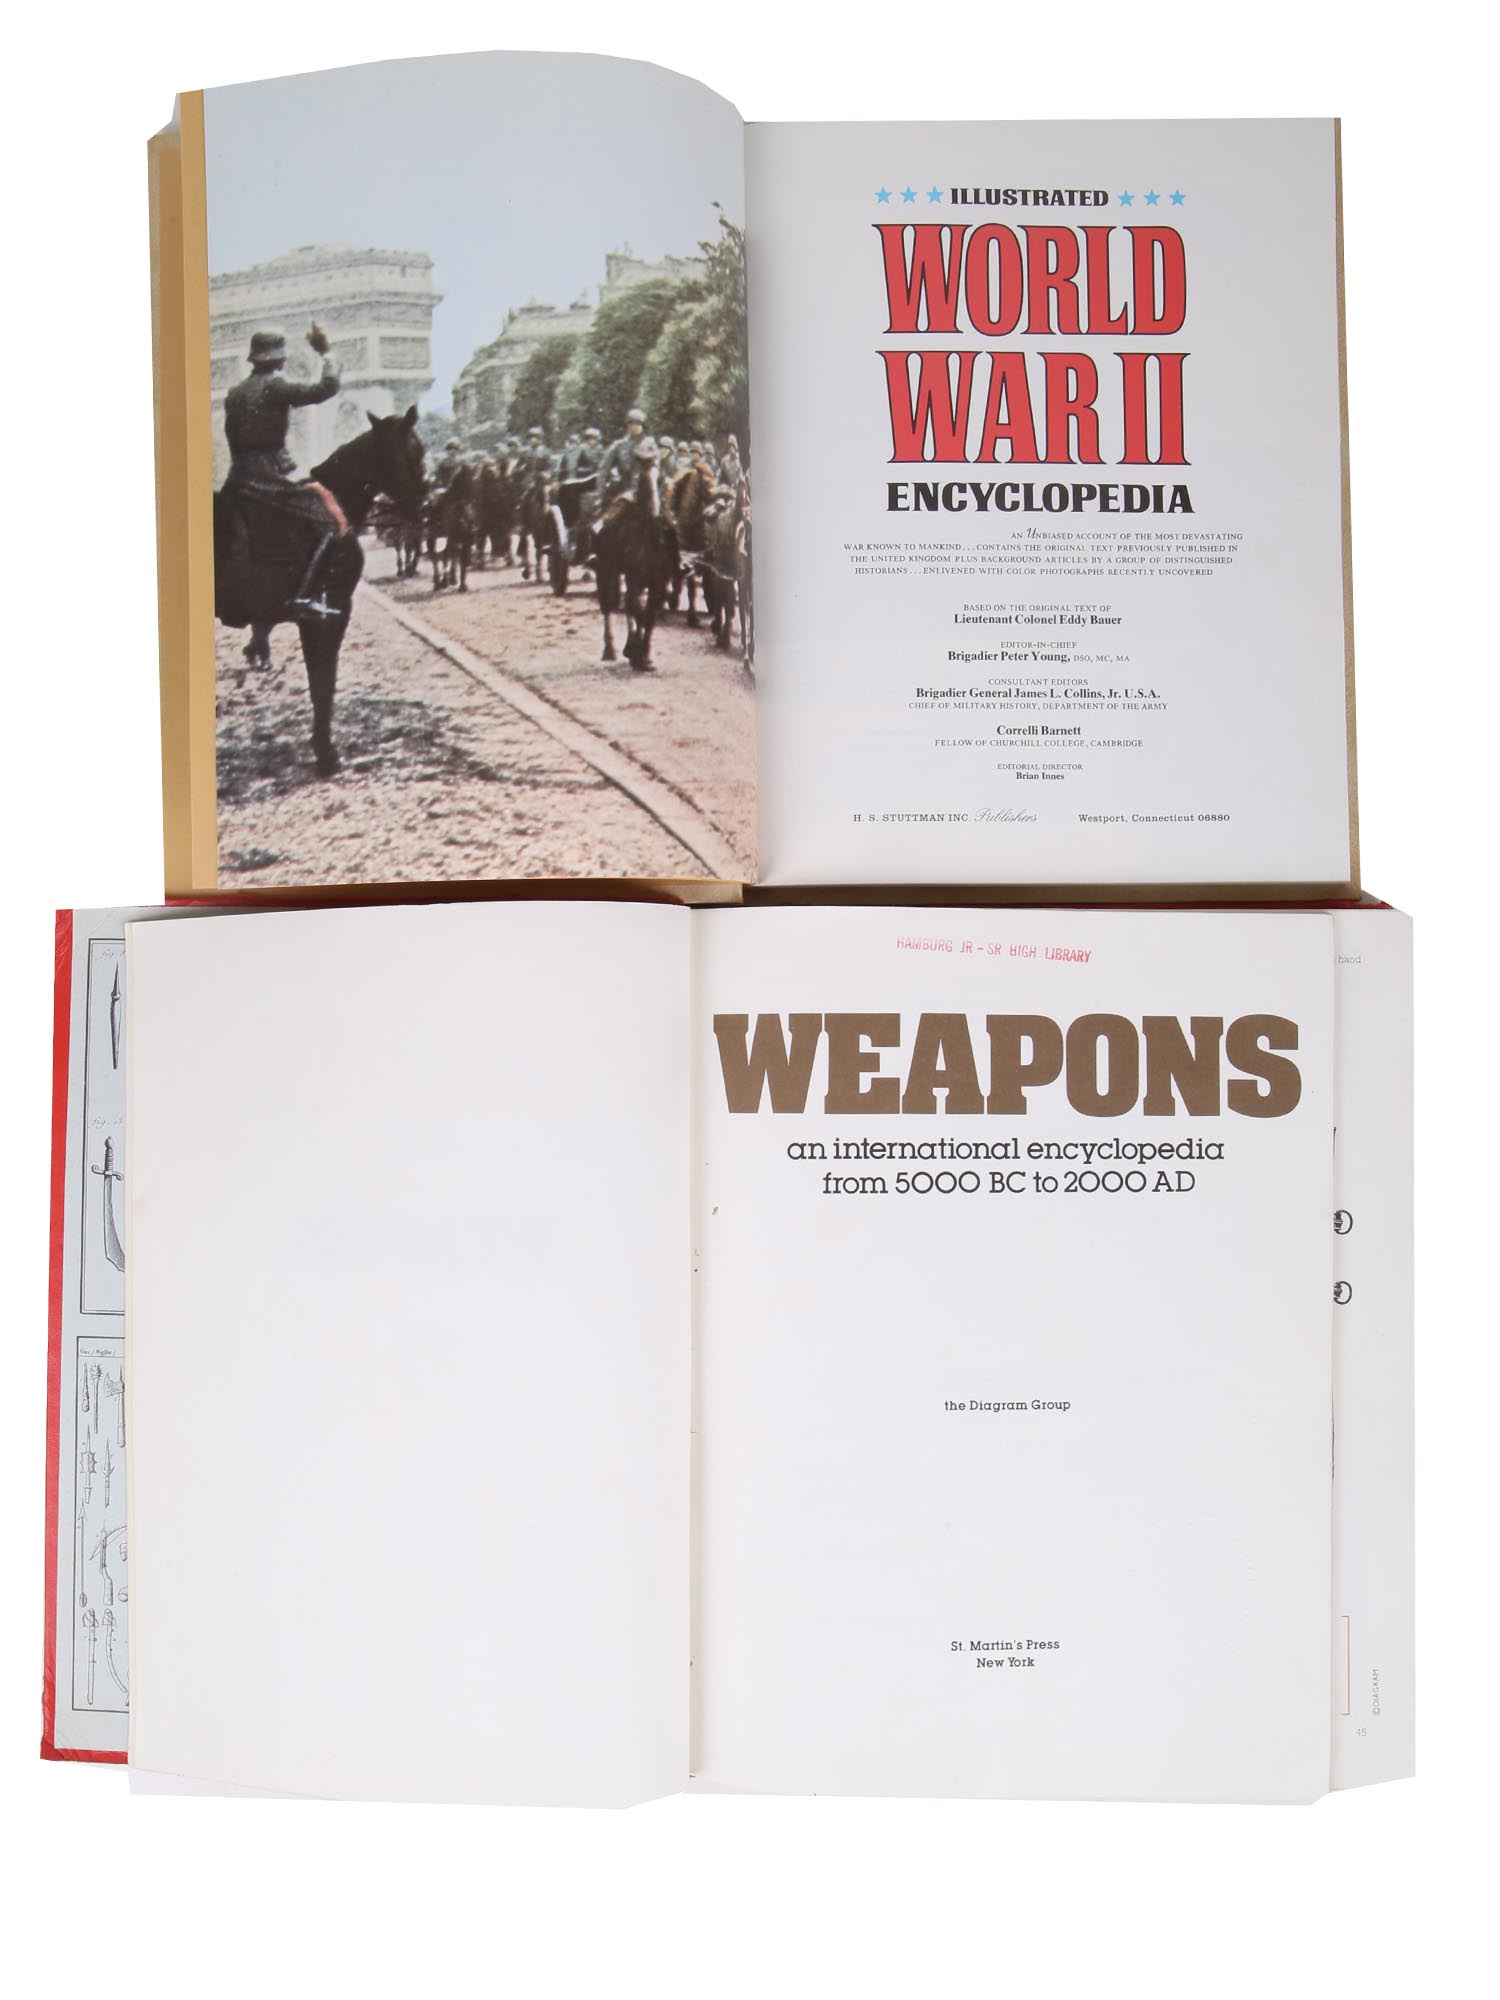 SET OF BOOKS ABOUT WW2 AND MILITARY COLLECTIBLES PIC-4